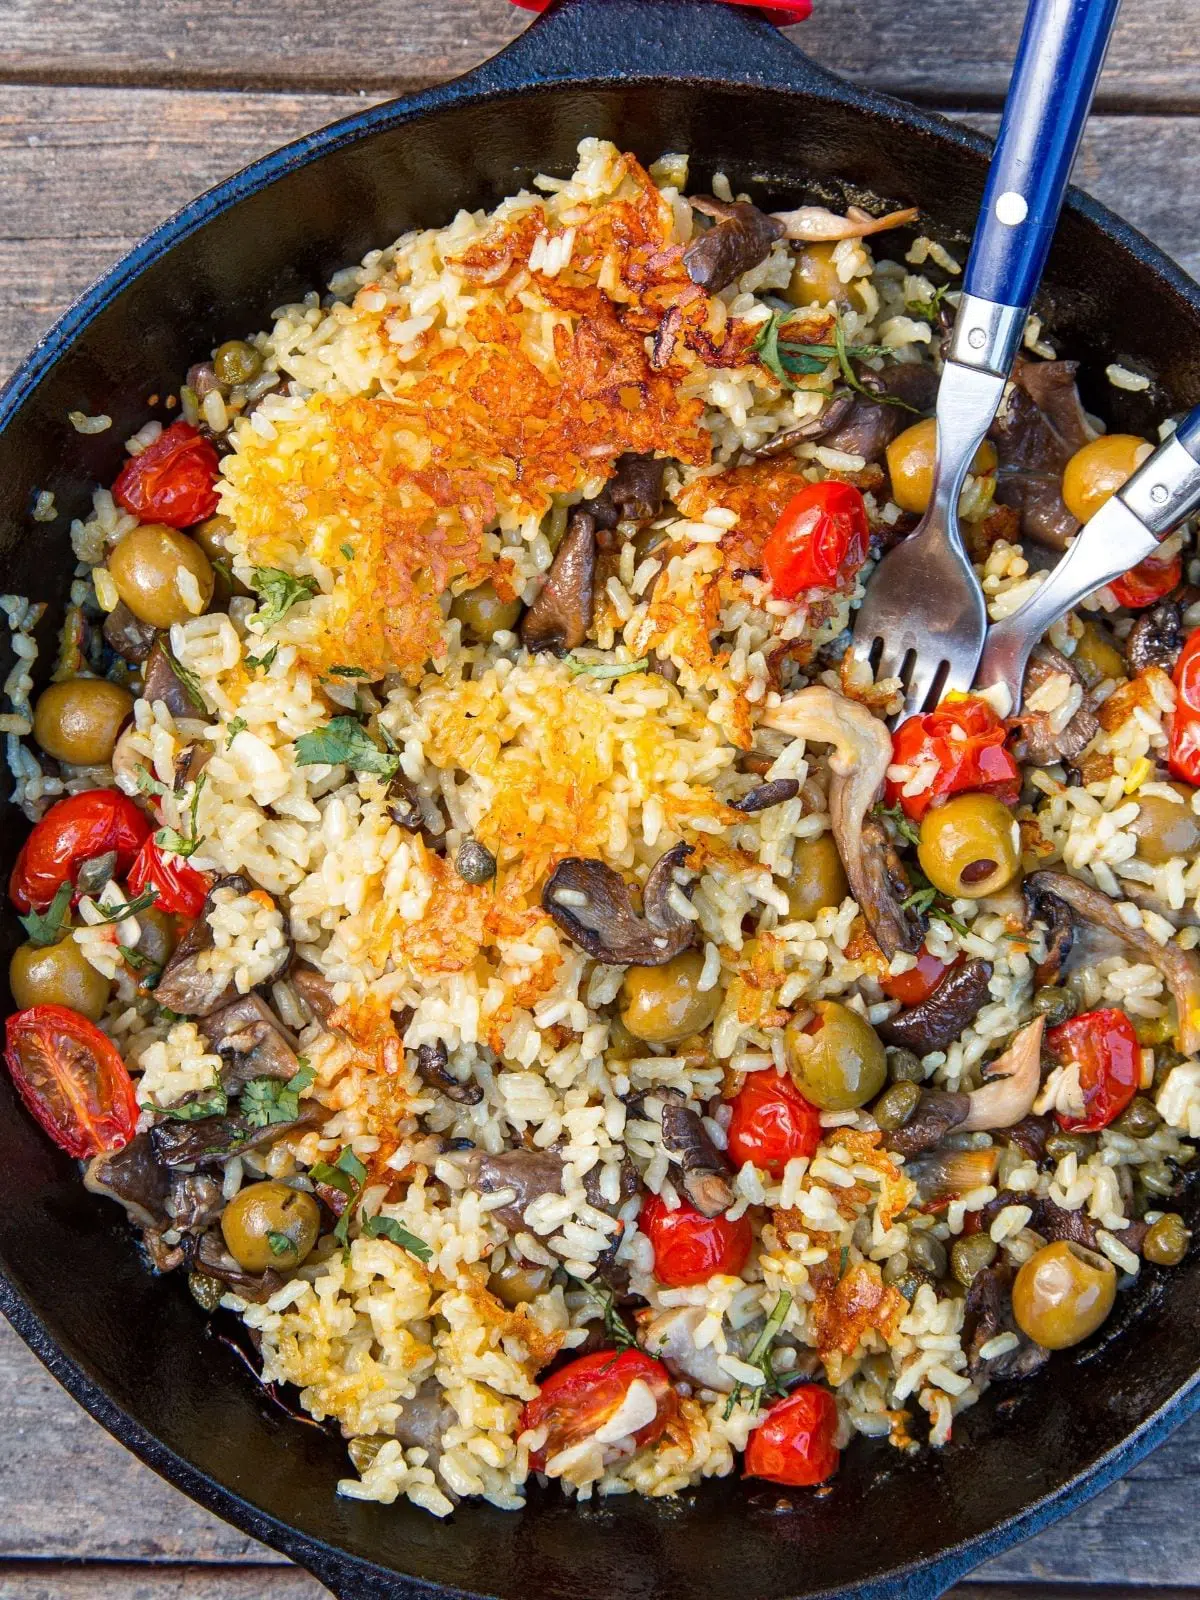 Overhead view of vegan paella in a skillet